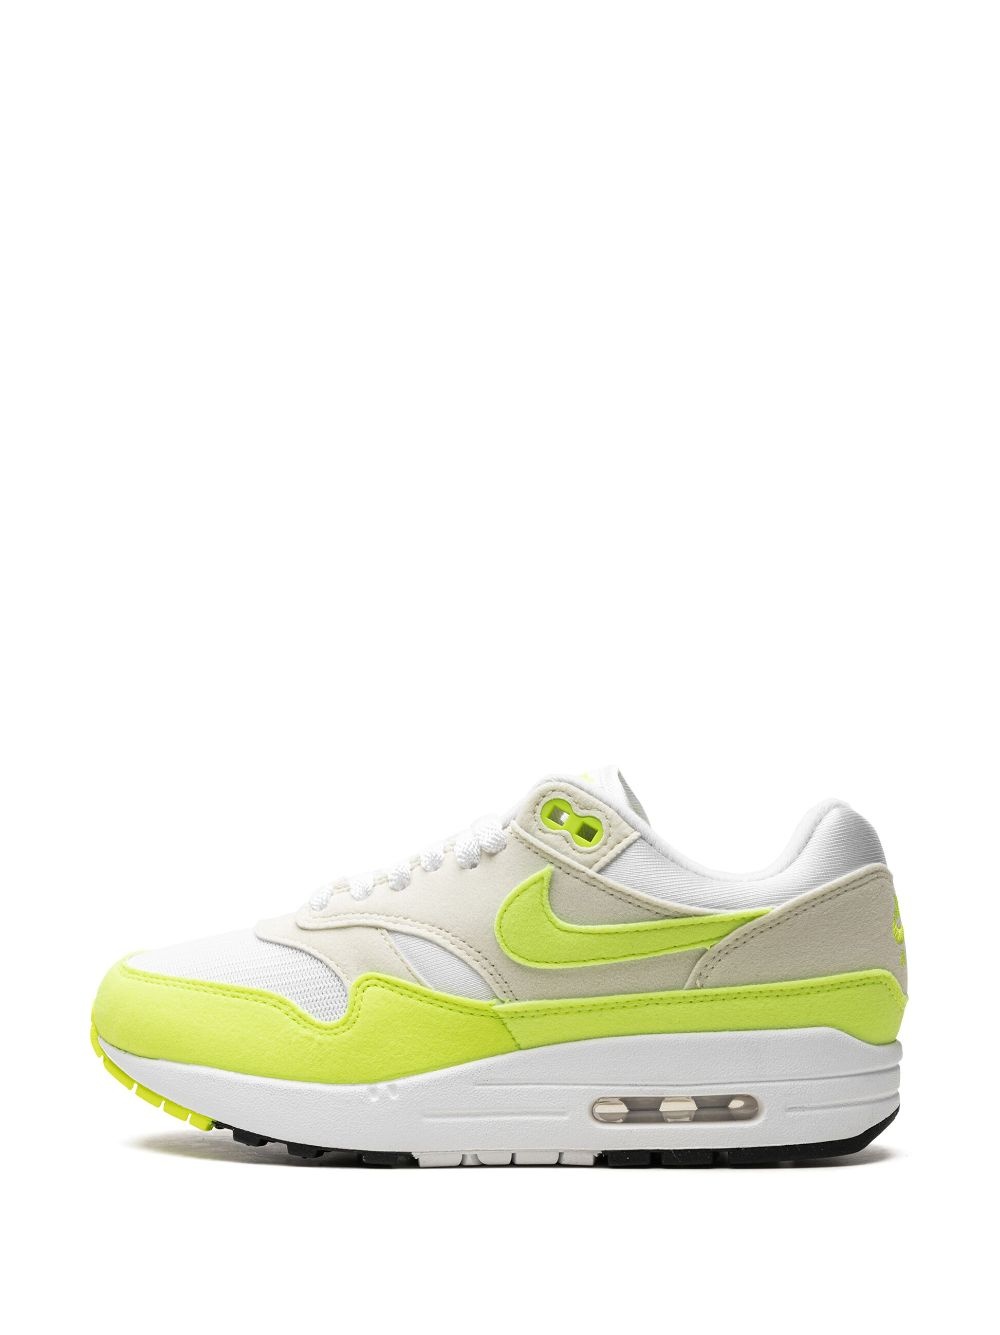 Air Max 1 "Volt Suede" sneakers - 5